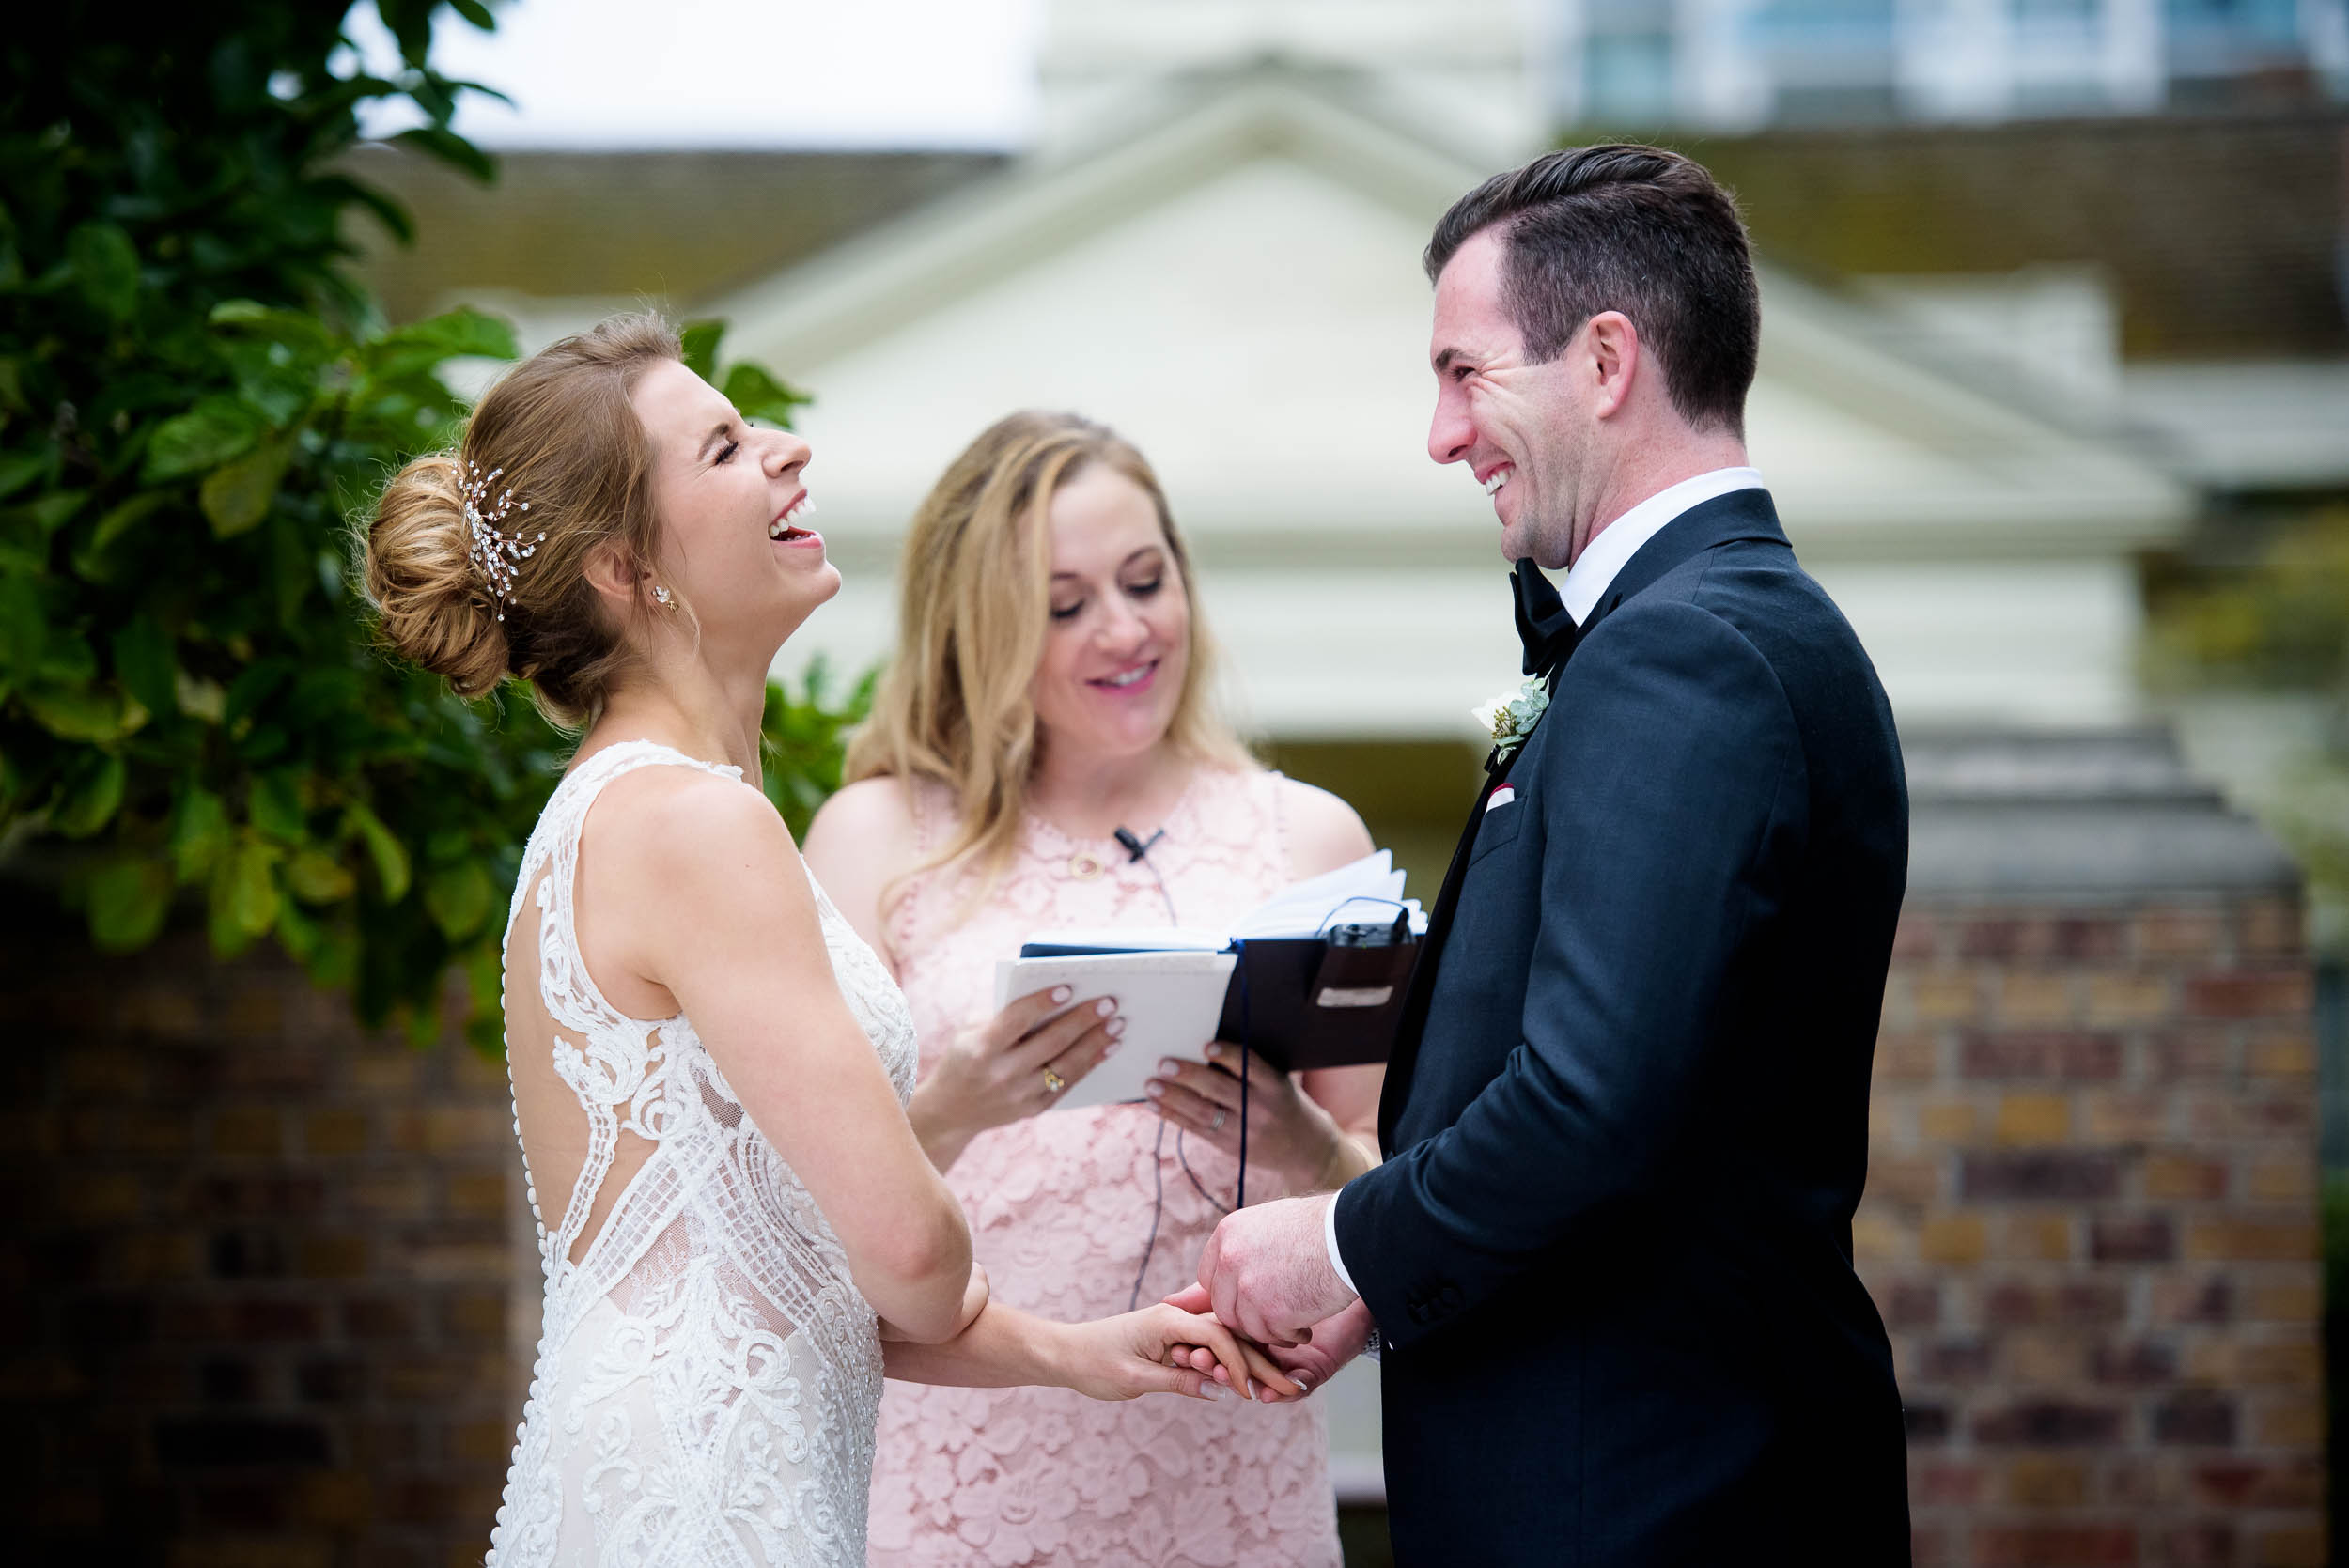 Bride and groom share a laugh during a Glessner House Chicago wedding ceremony.